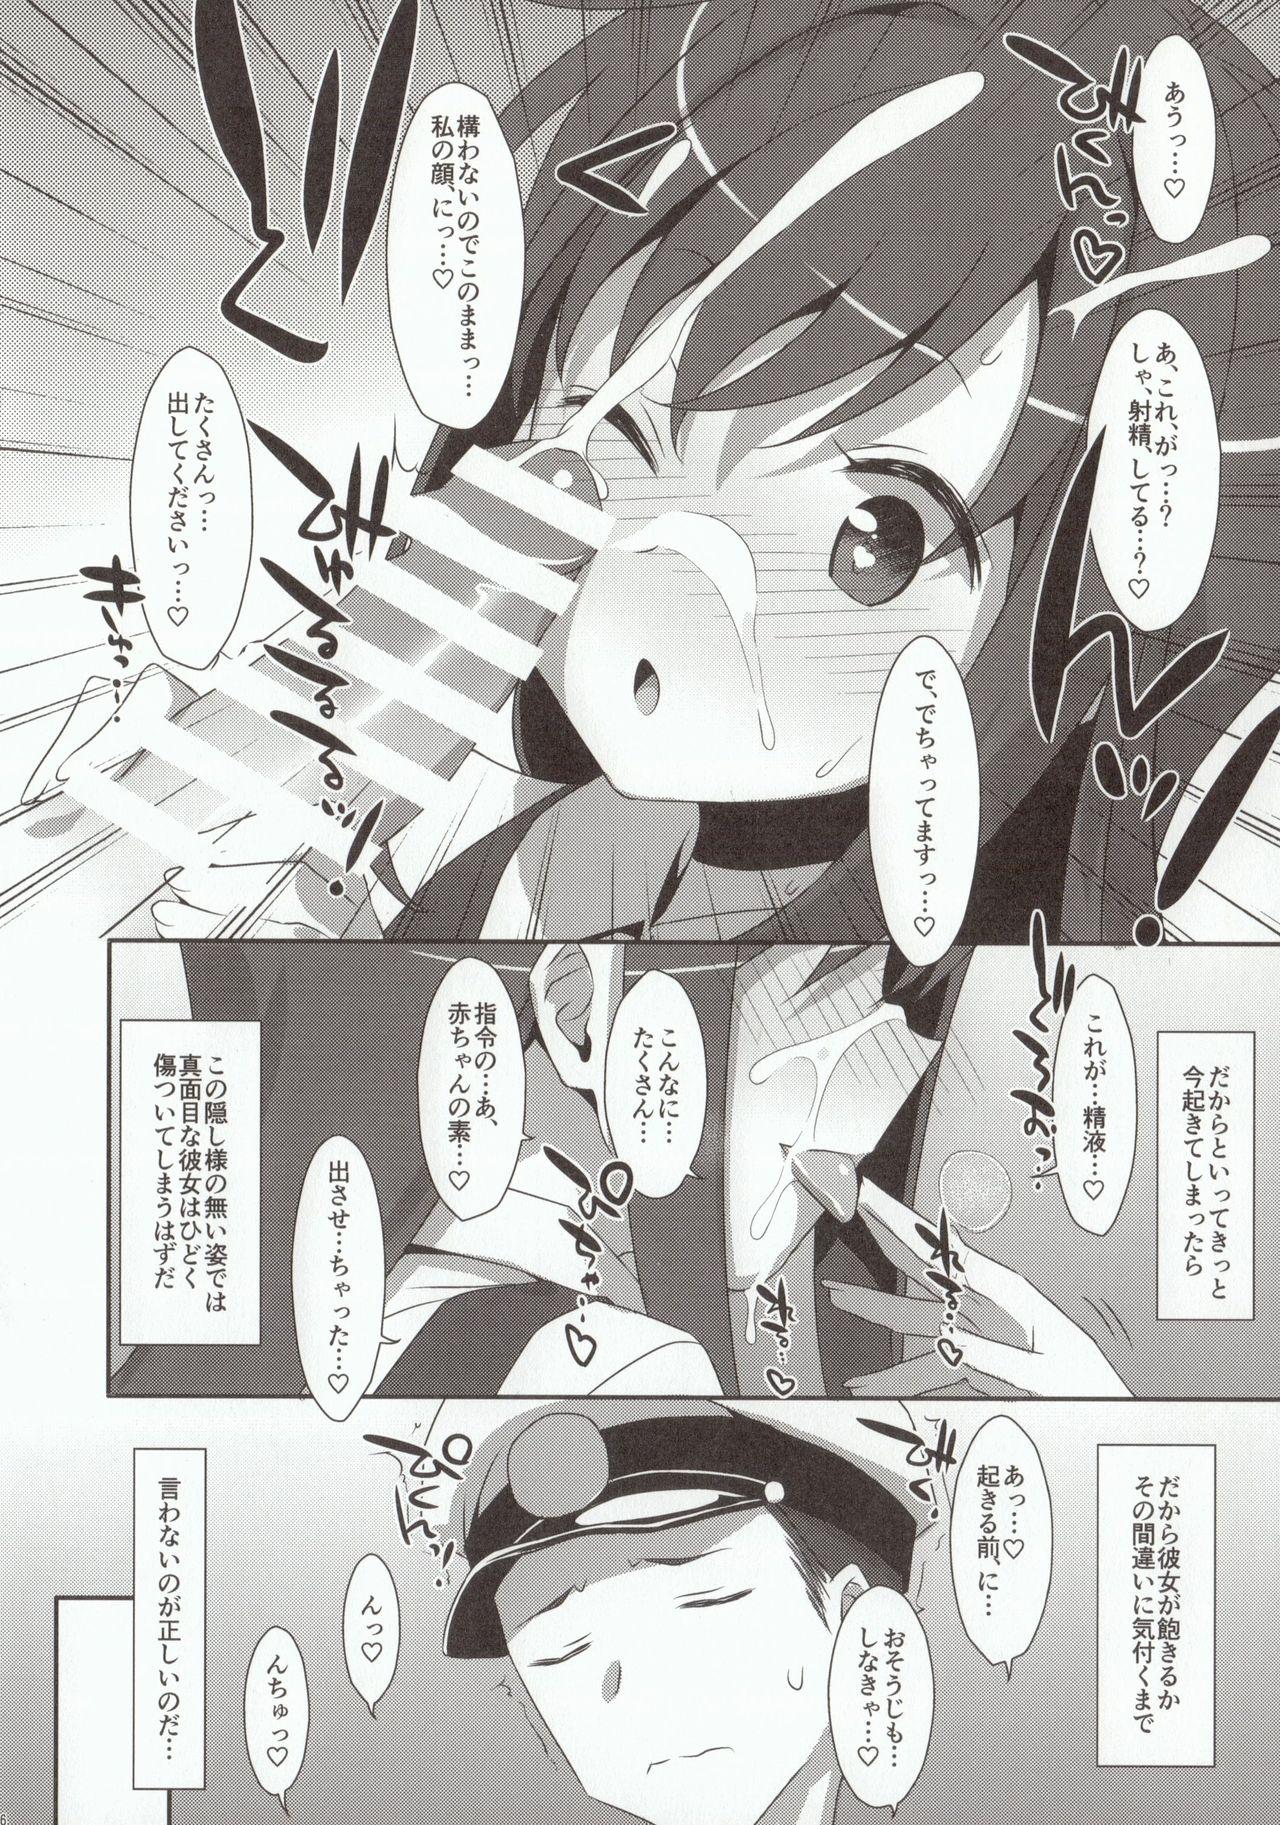 France Mischief - Kantai collection Insertion - Page 5